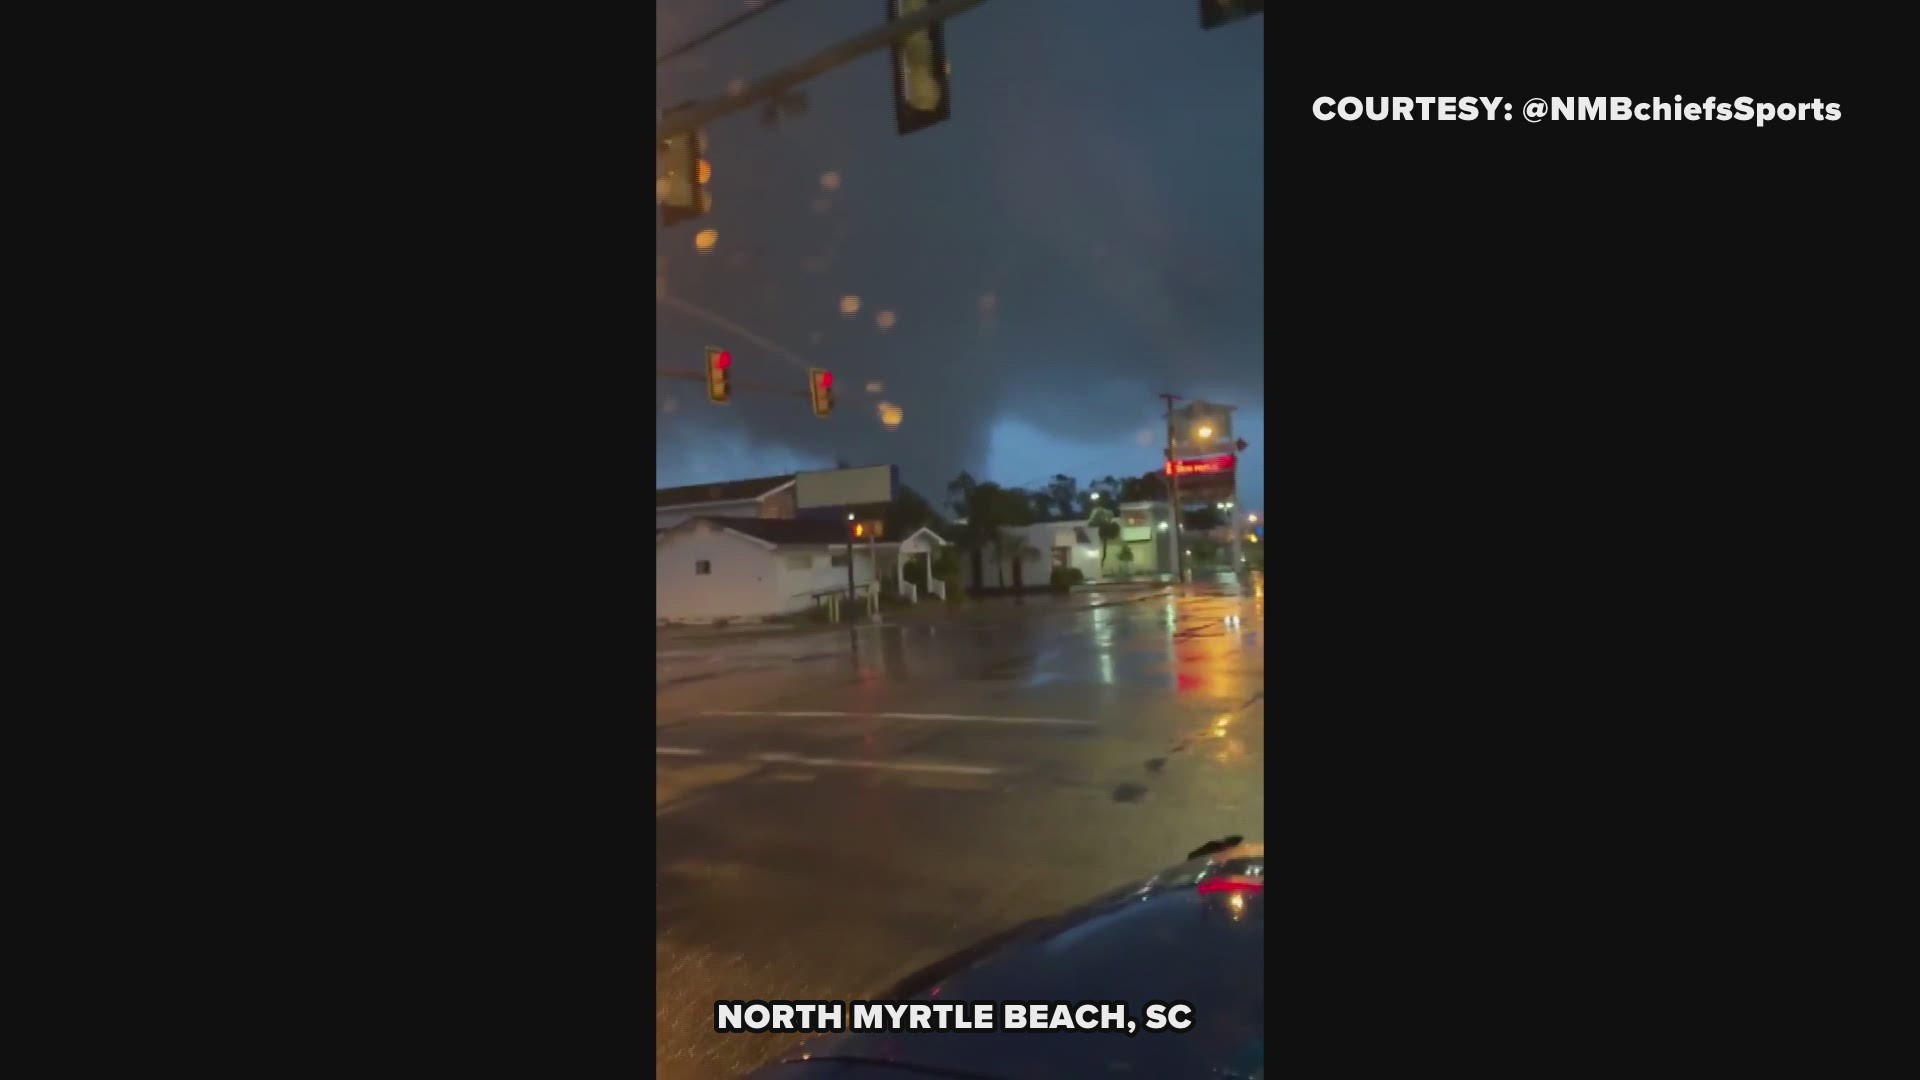 Videos show at least two tornadoes that touched down early Thursday morning in Pender County, NC and North Myrtle Beach, SC. Strong winds from Dorian prompted tornado warnings for several coastal counties.